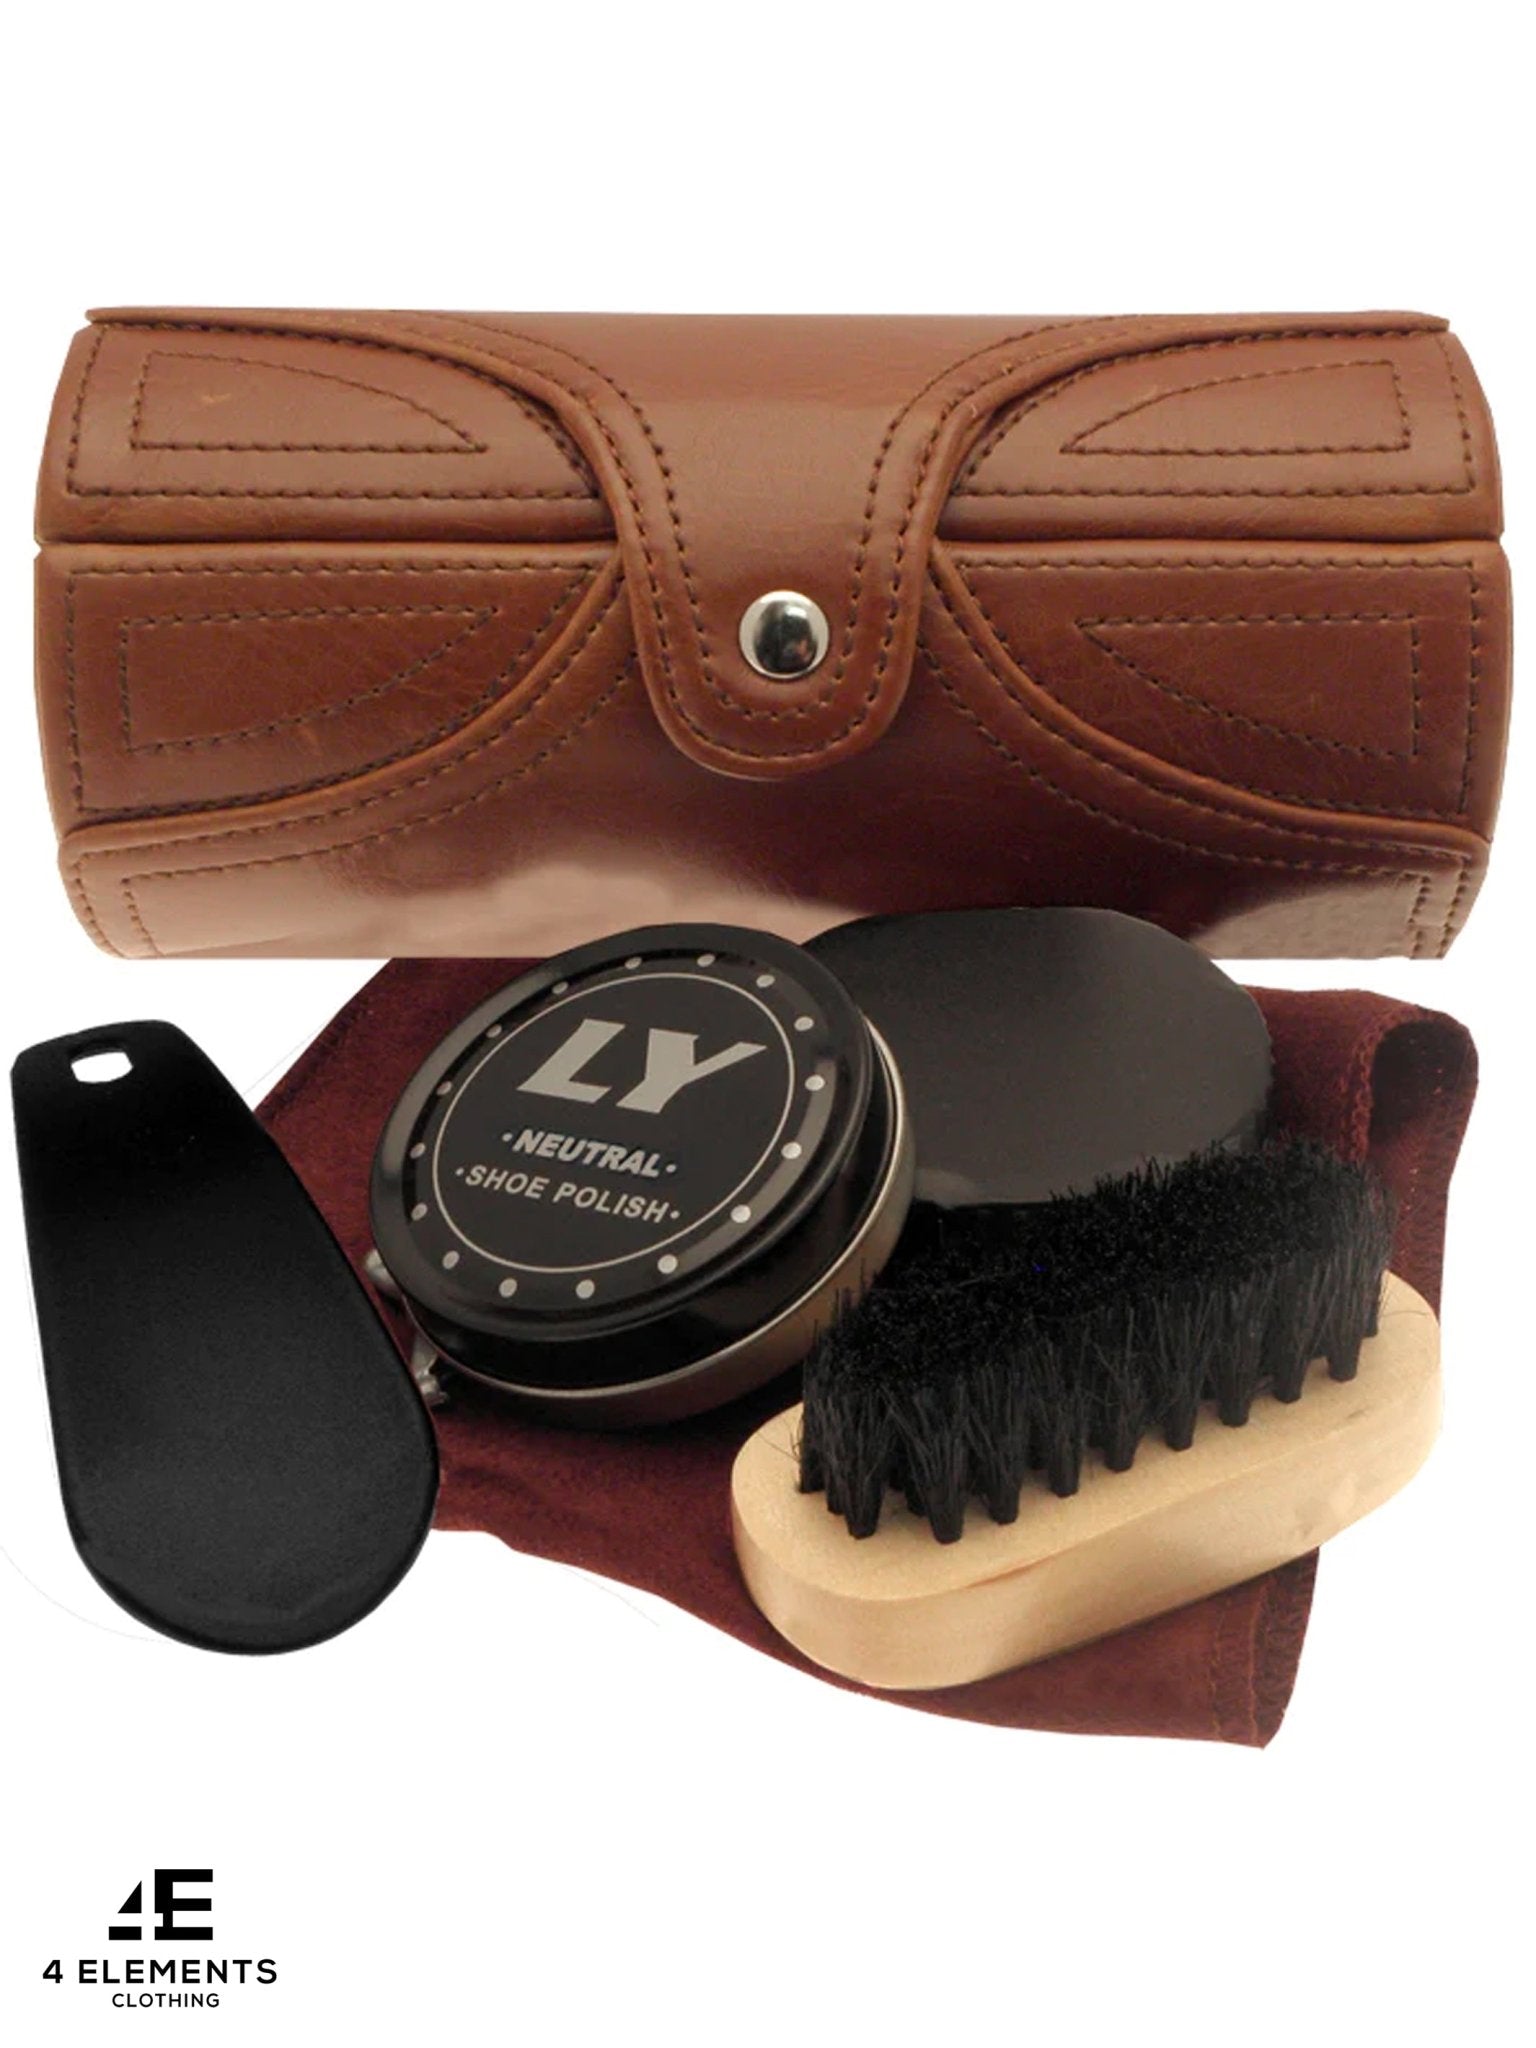 The British Bag Company British Bag Company - 5 Piece Barrel Shoe cleaning and care Kit Shoe & Clothing Care